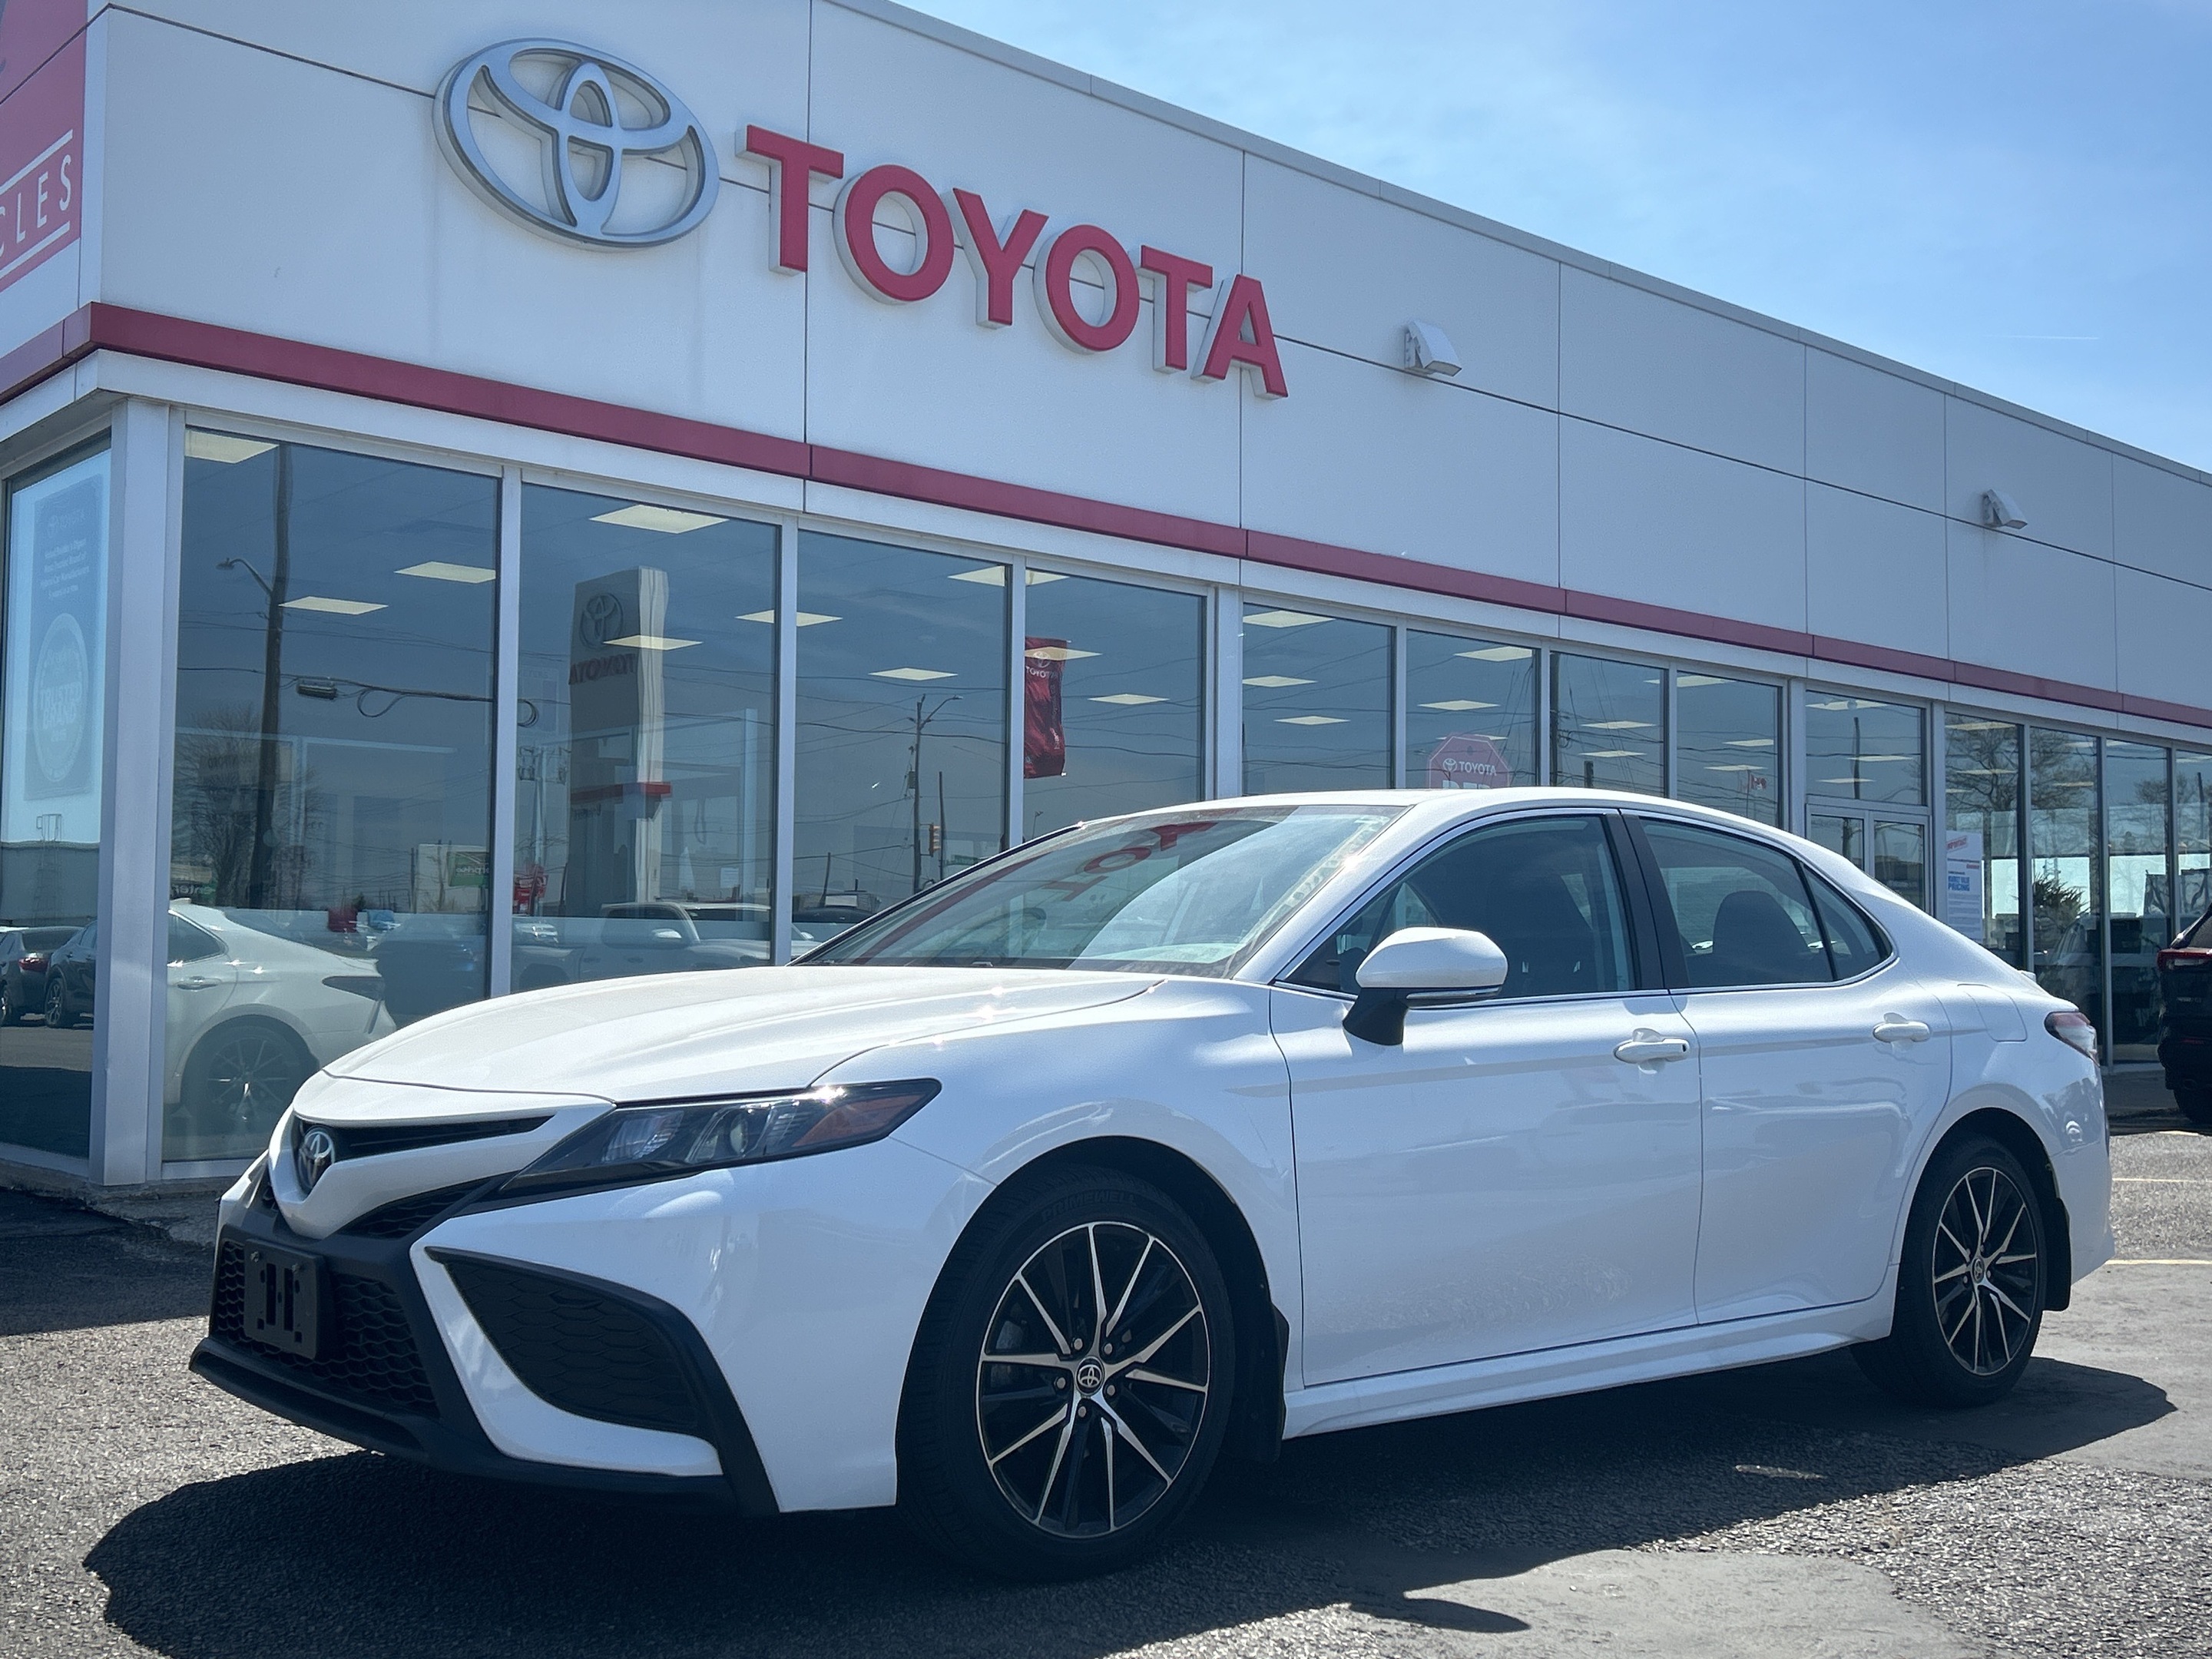 2021 Toyota Camry SE WITH UPGRADE PACKAGE - VERY RARE FIND